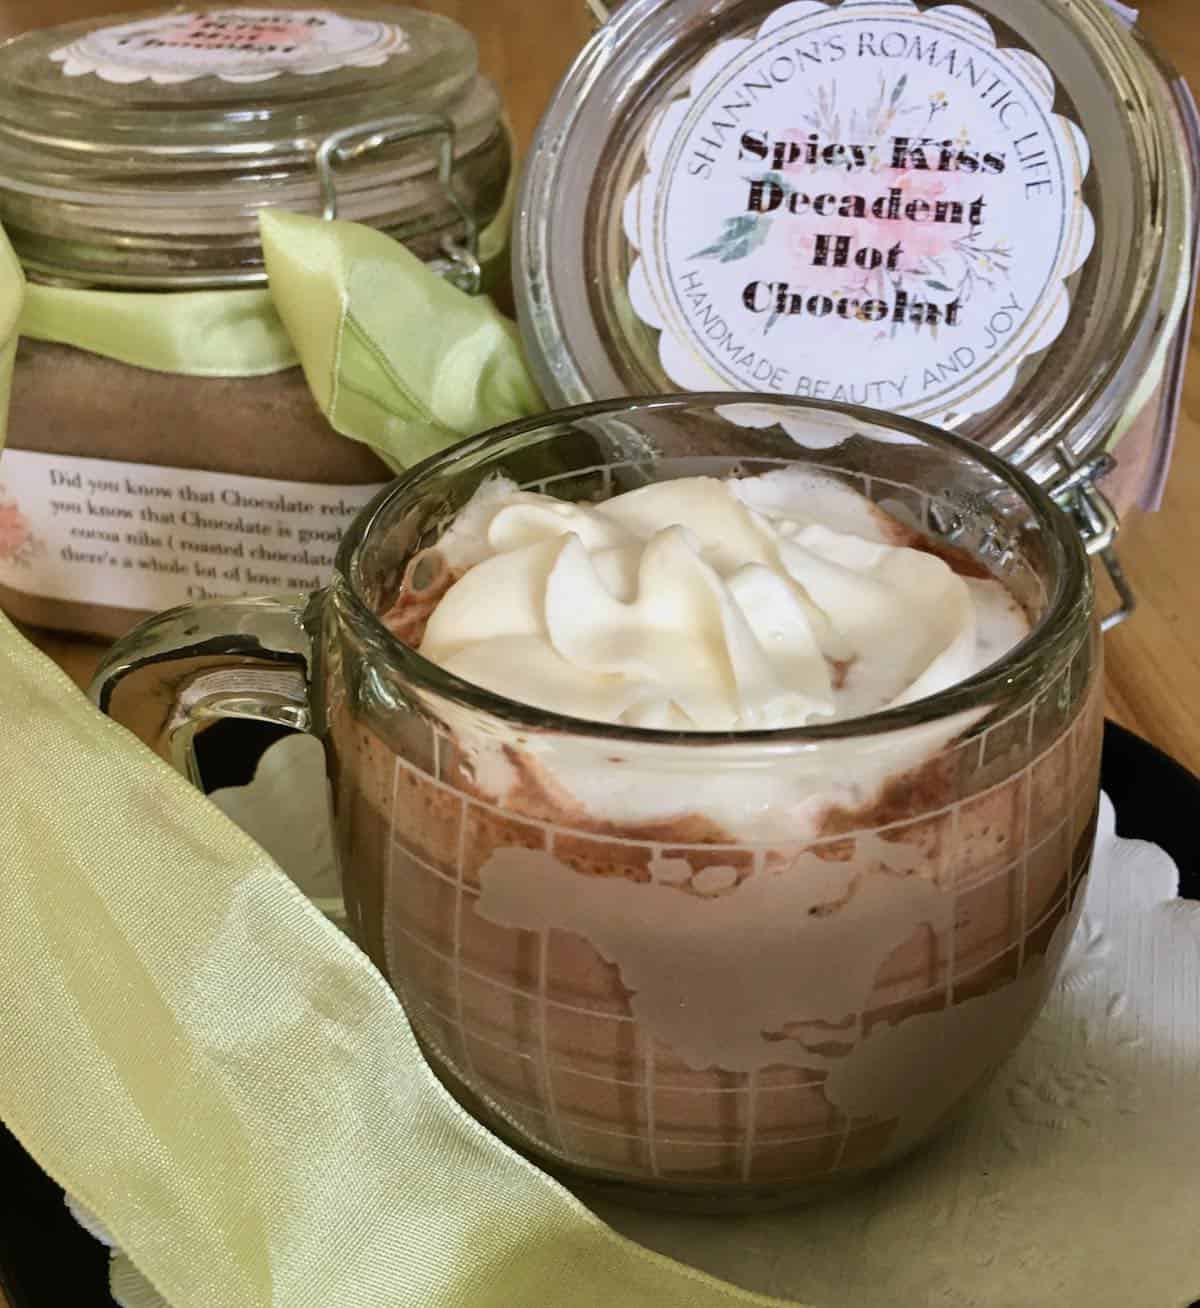 Hot chocolate in cup with product package.